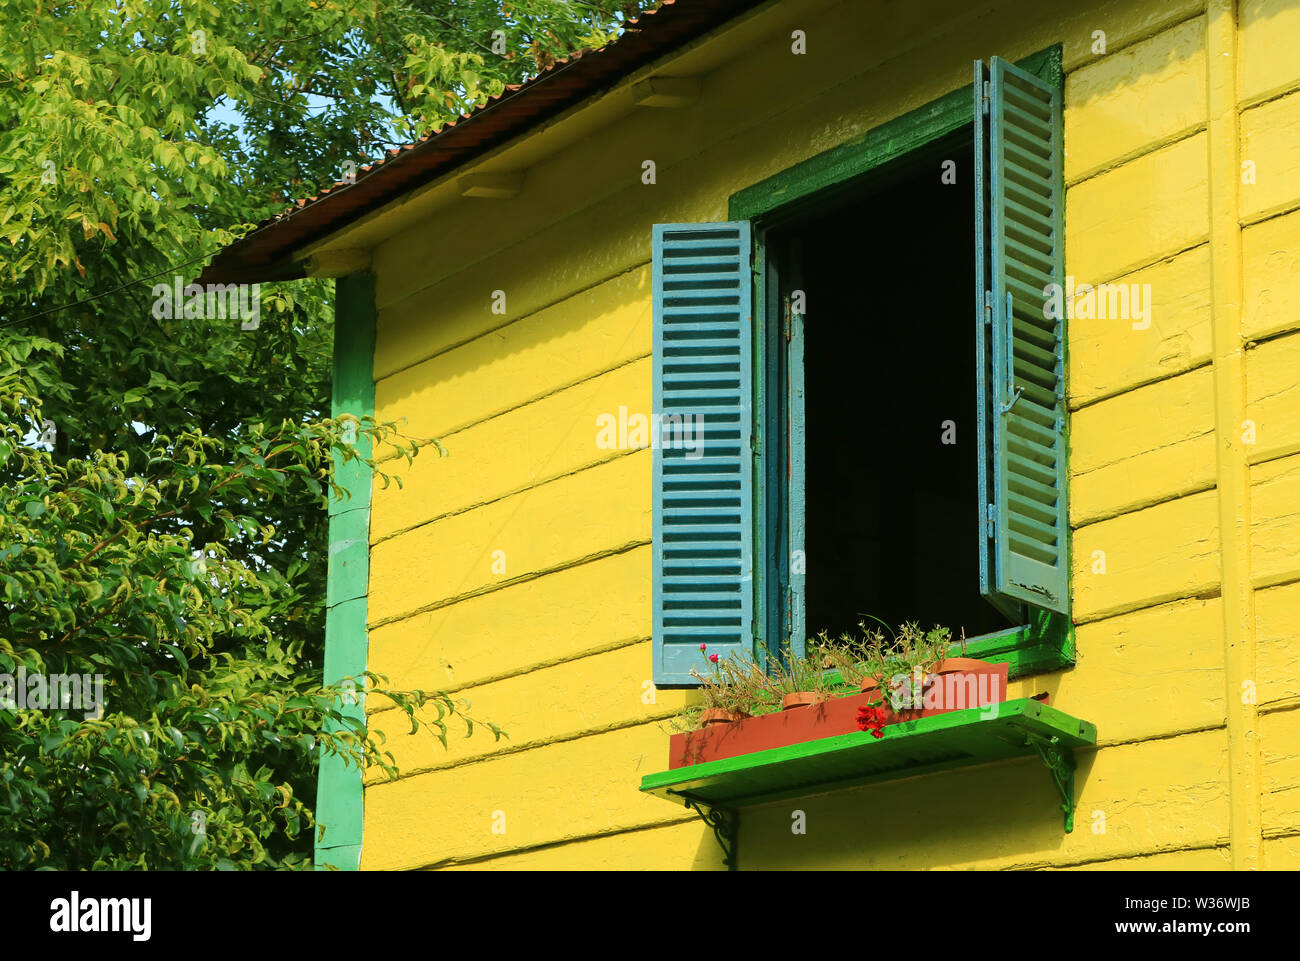 Blue wooden window shutters on vivid yellow house among green foliage in sunlight Stock Photo